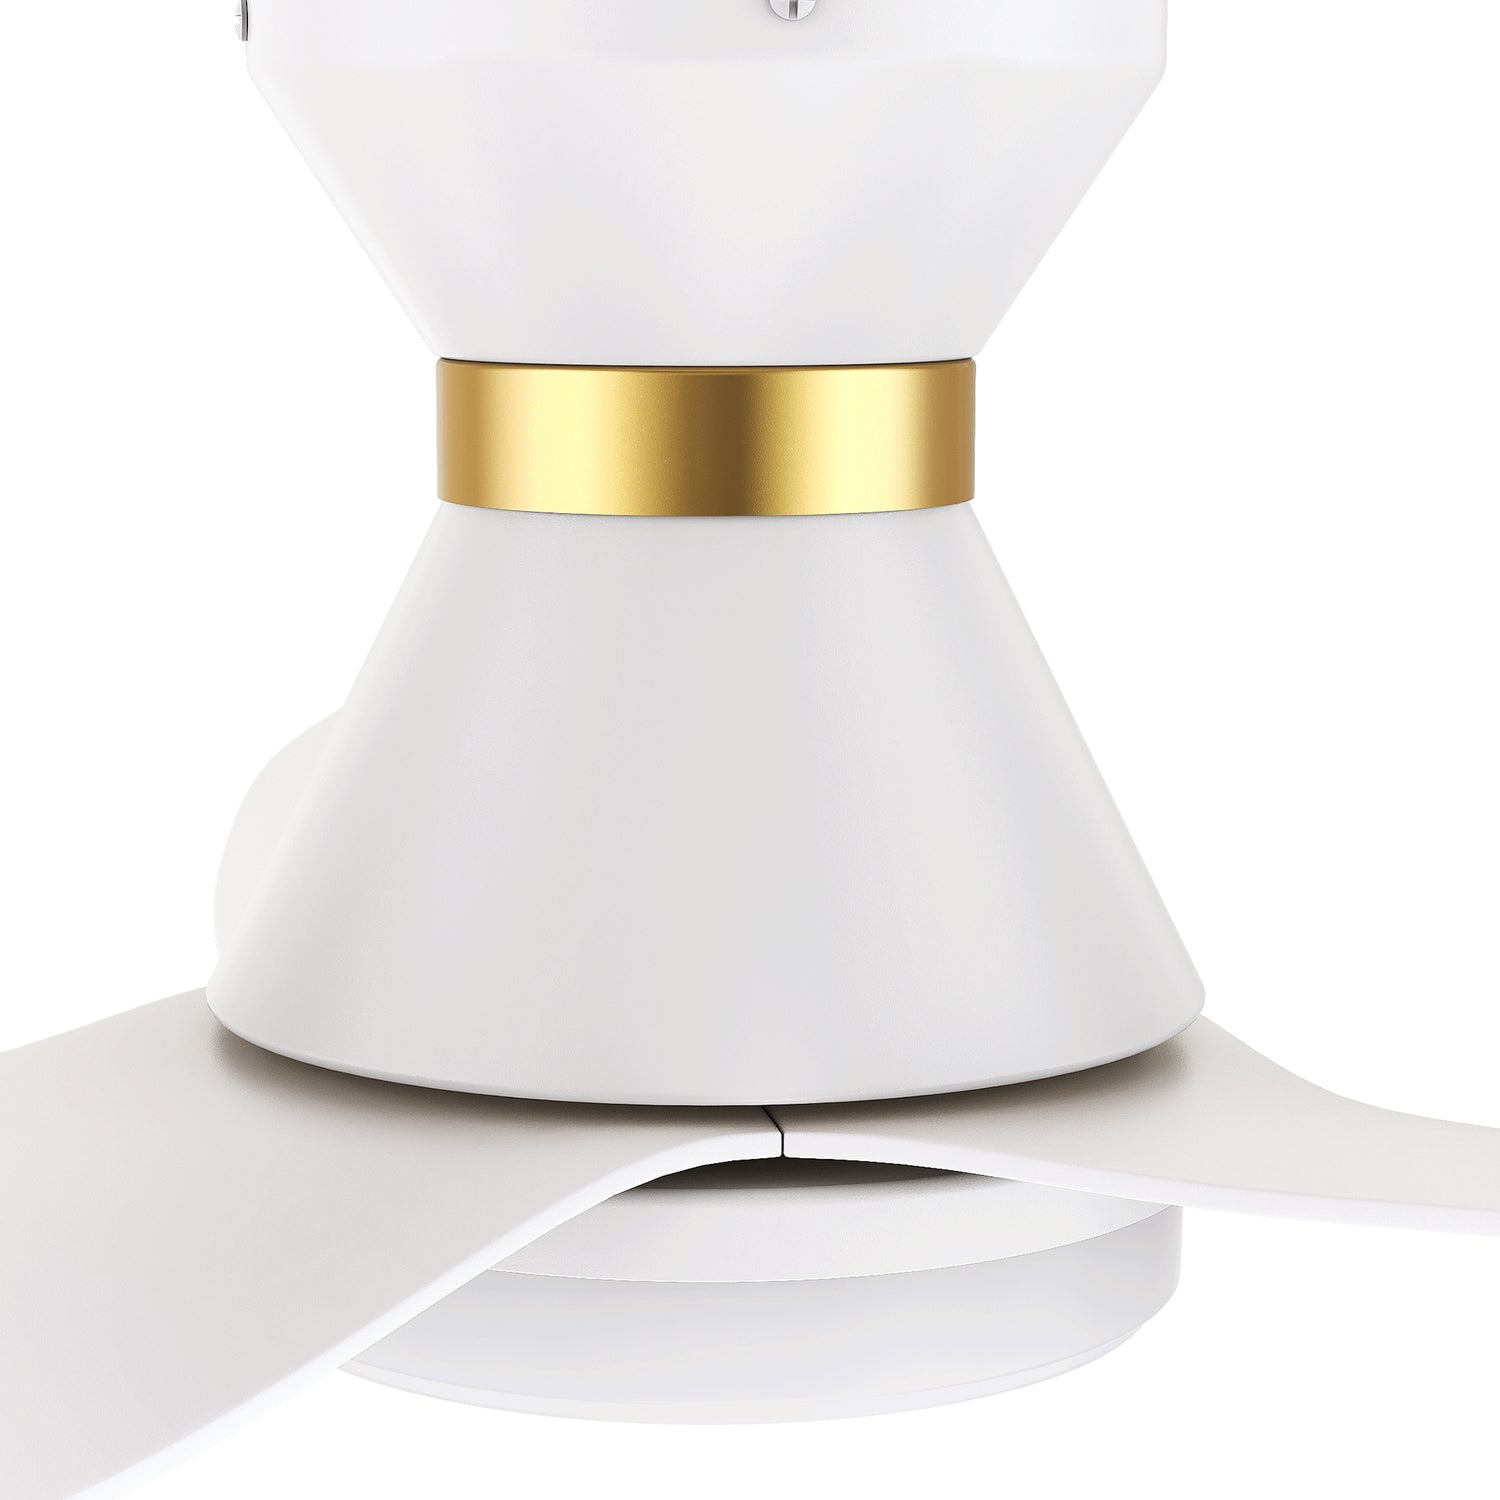 The Smafan Joliet Smart Ceiling Fan with 3 blades and a 45-iade of nch blade sweep with a swift modern appearance. Its compact size is perfect for smaller bedrooms. 